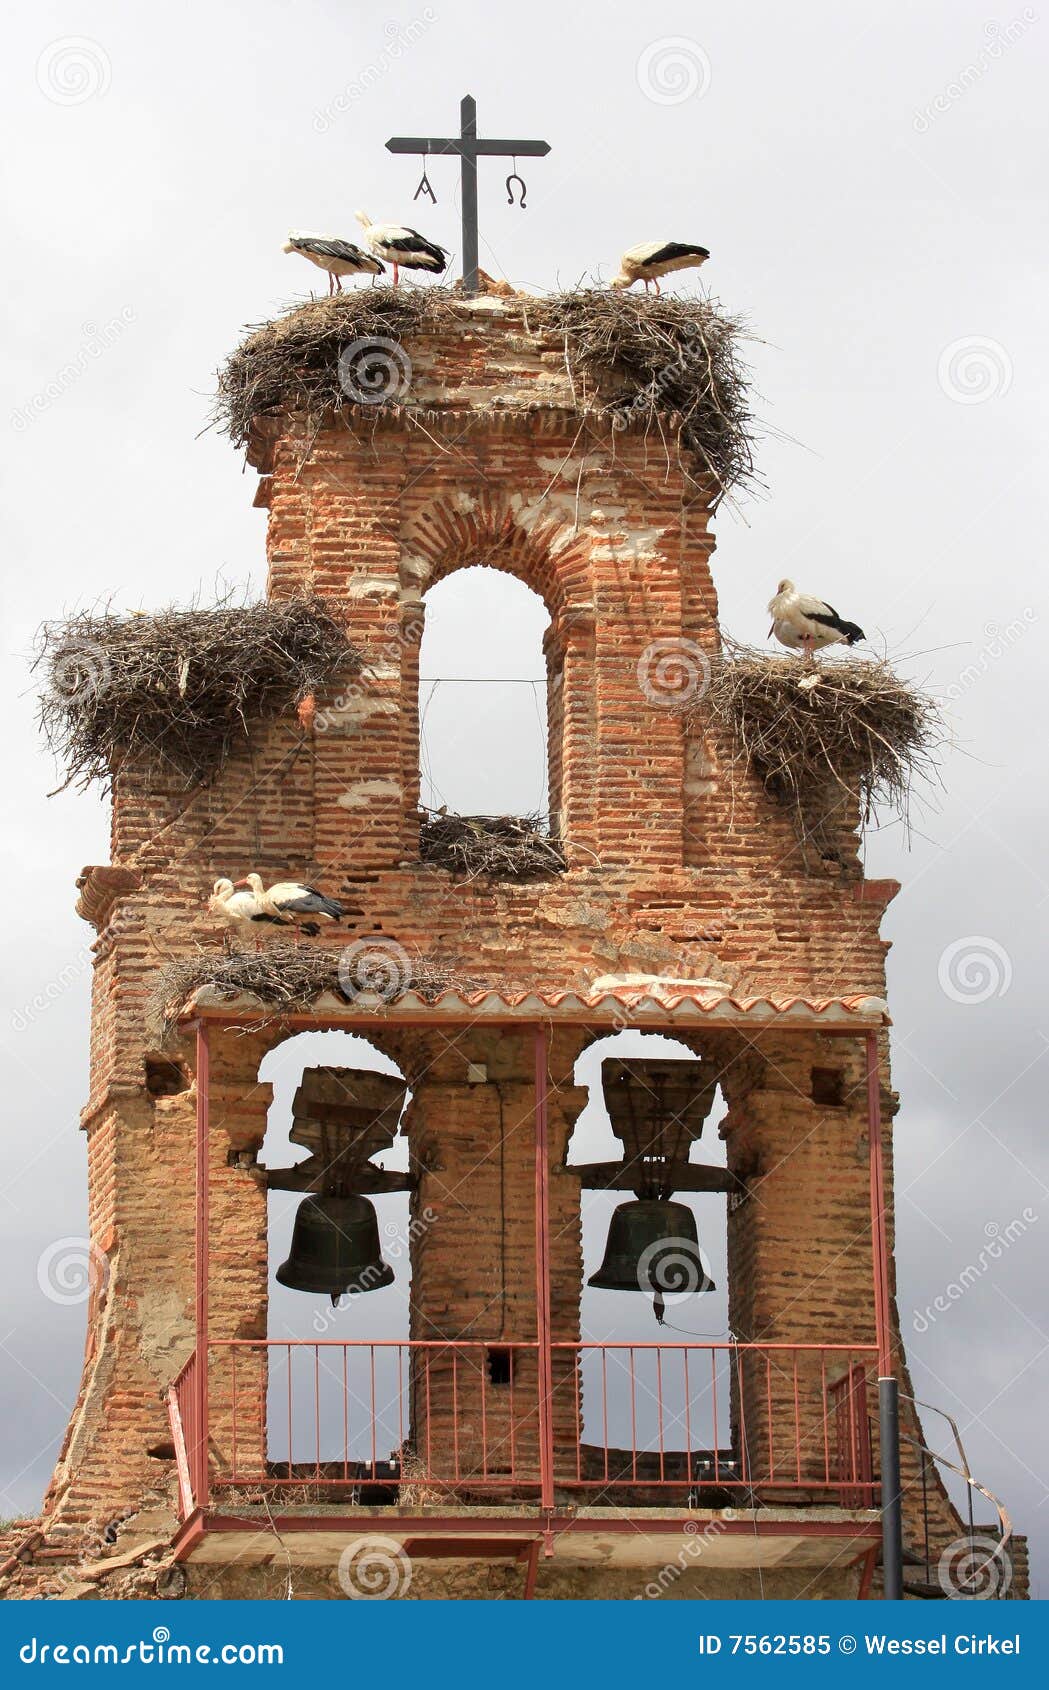 storks upon nest upon a spanish belfry